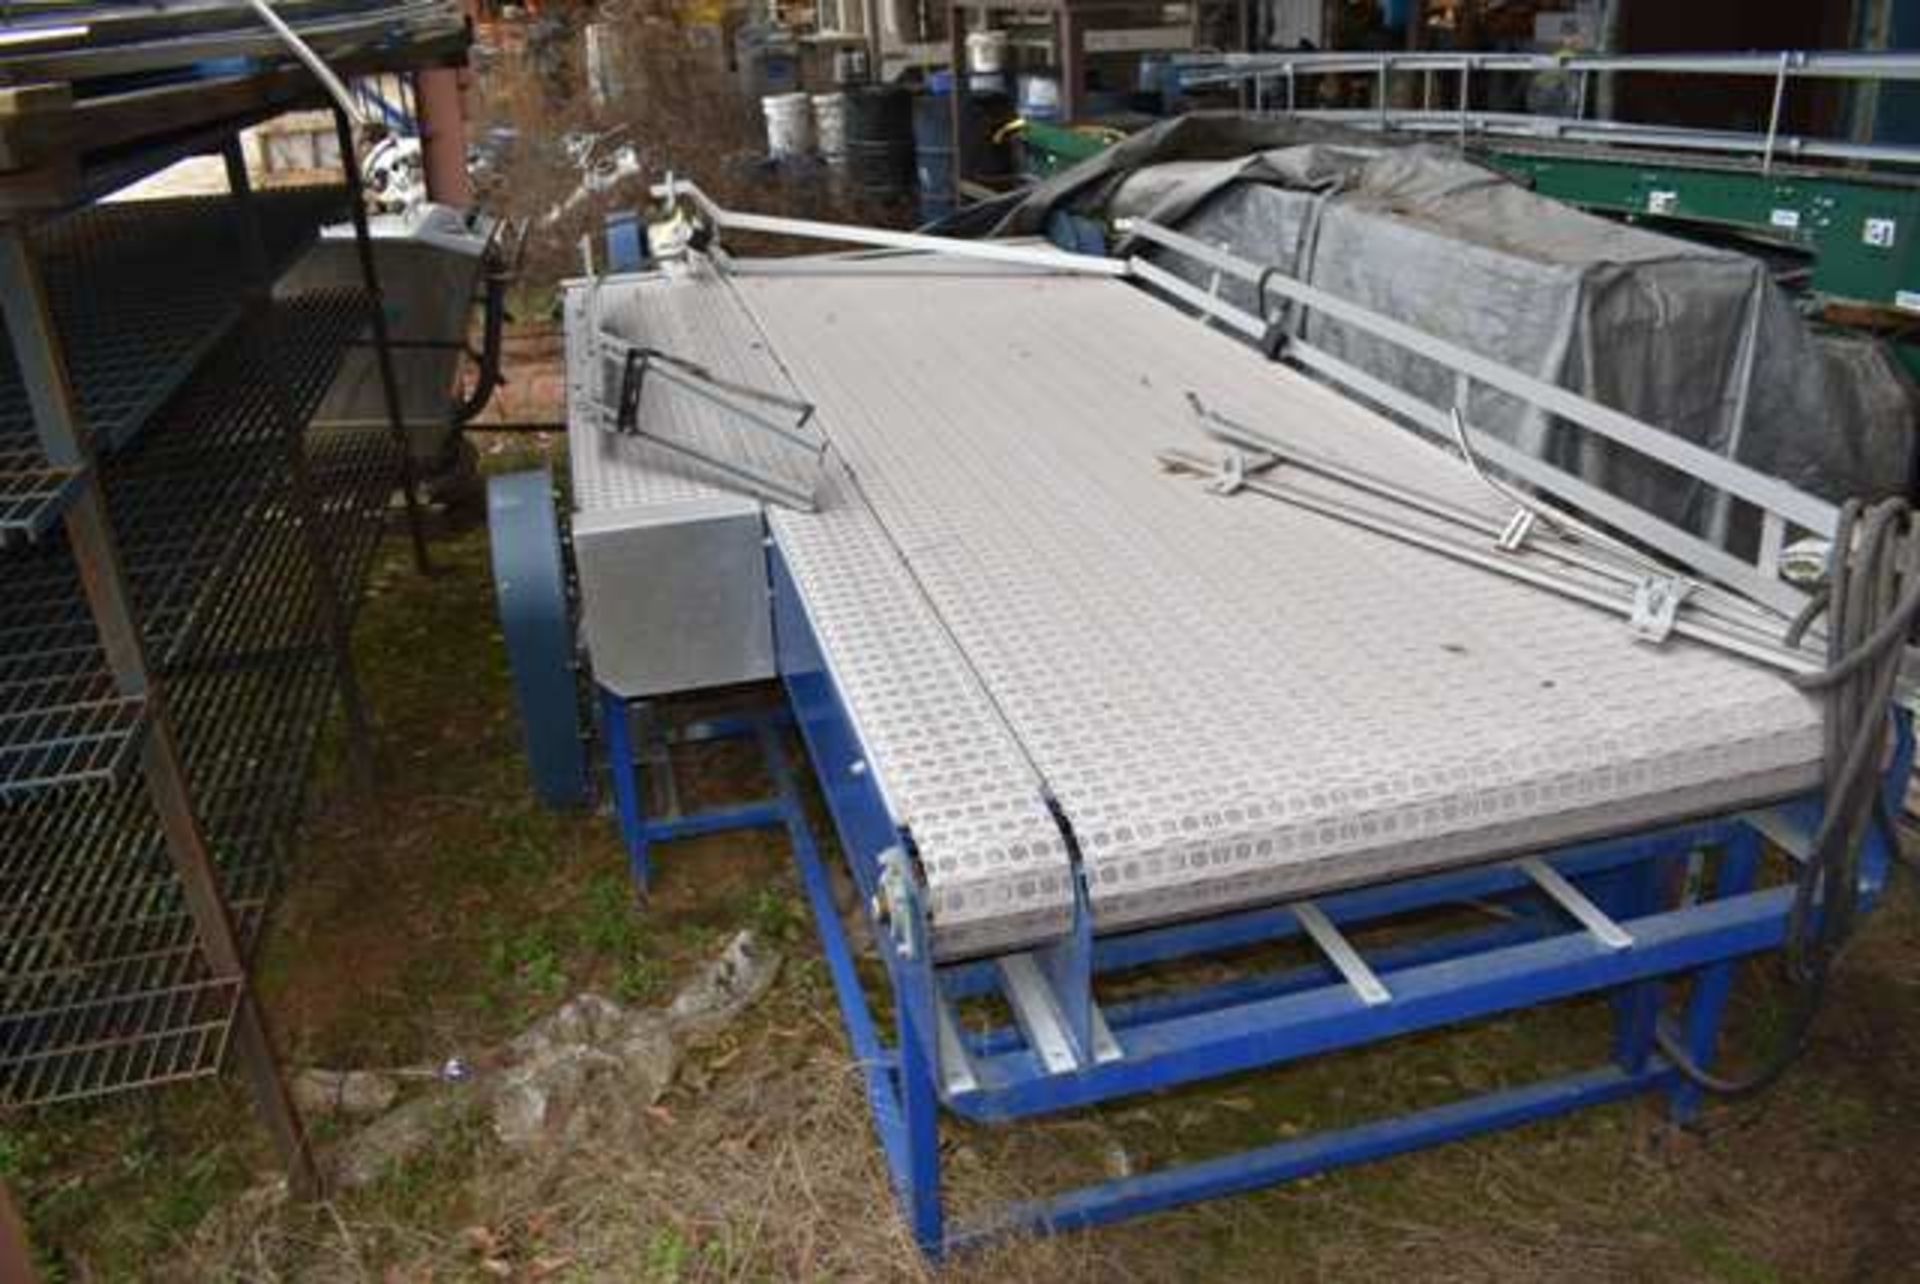 Ideas In Motion Motorized Belt Conveyor, 61 in. Overall Width x 16 ft. Overall Length - Image 3 of 3